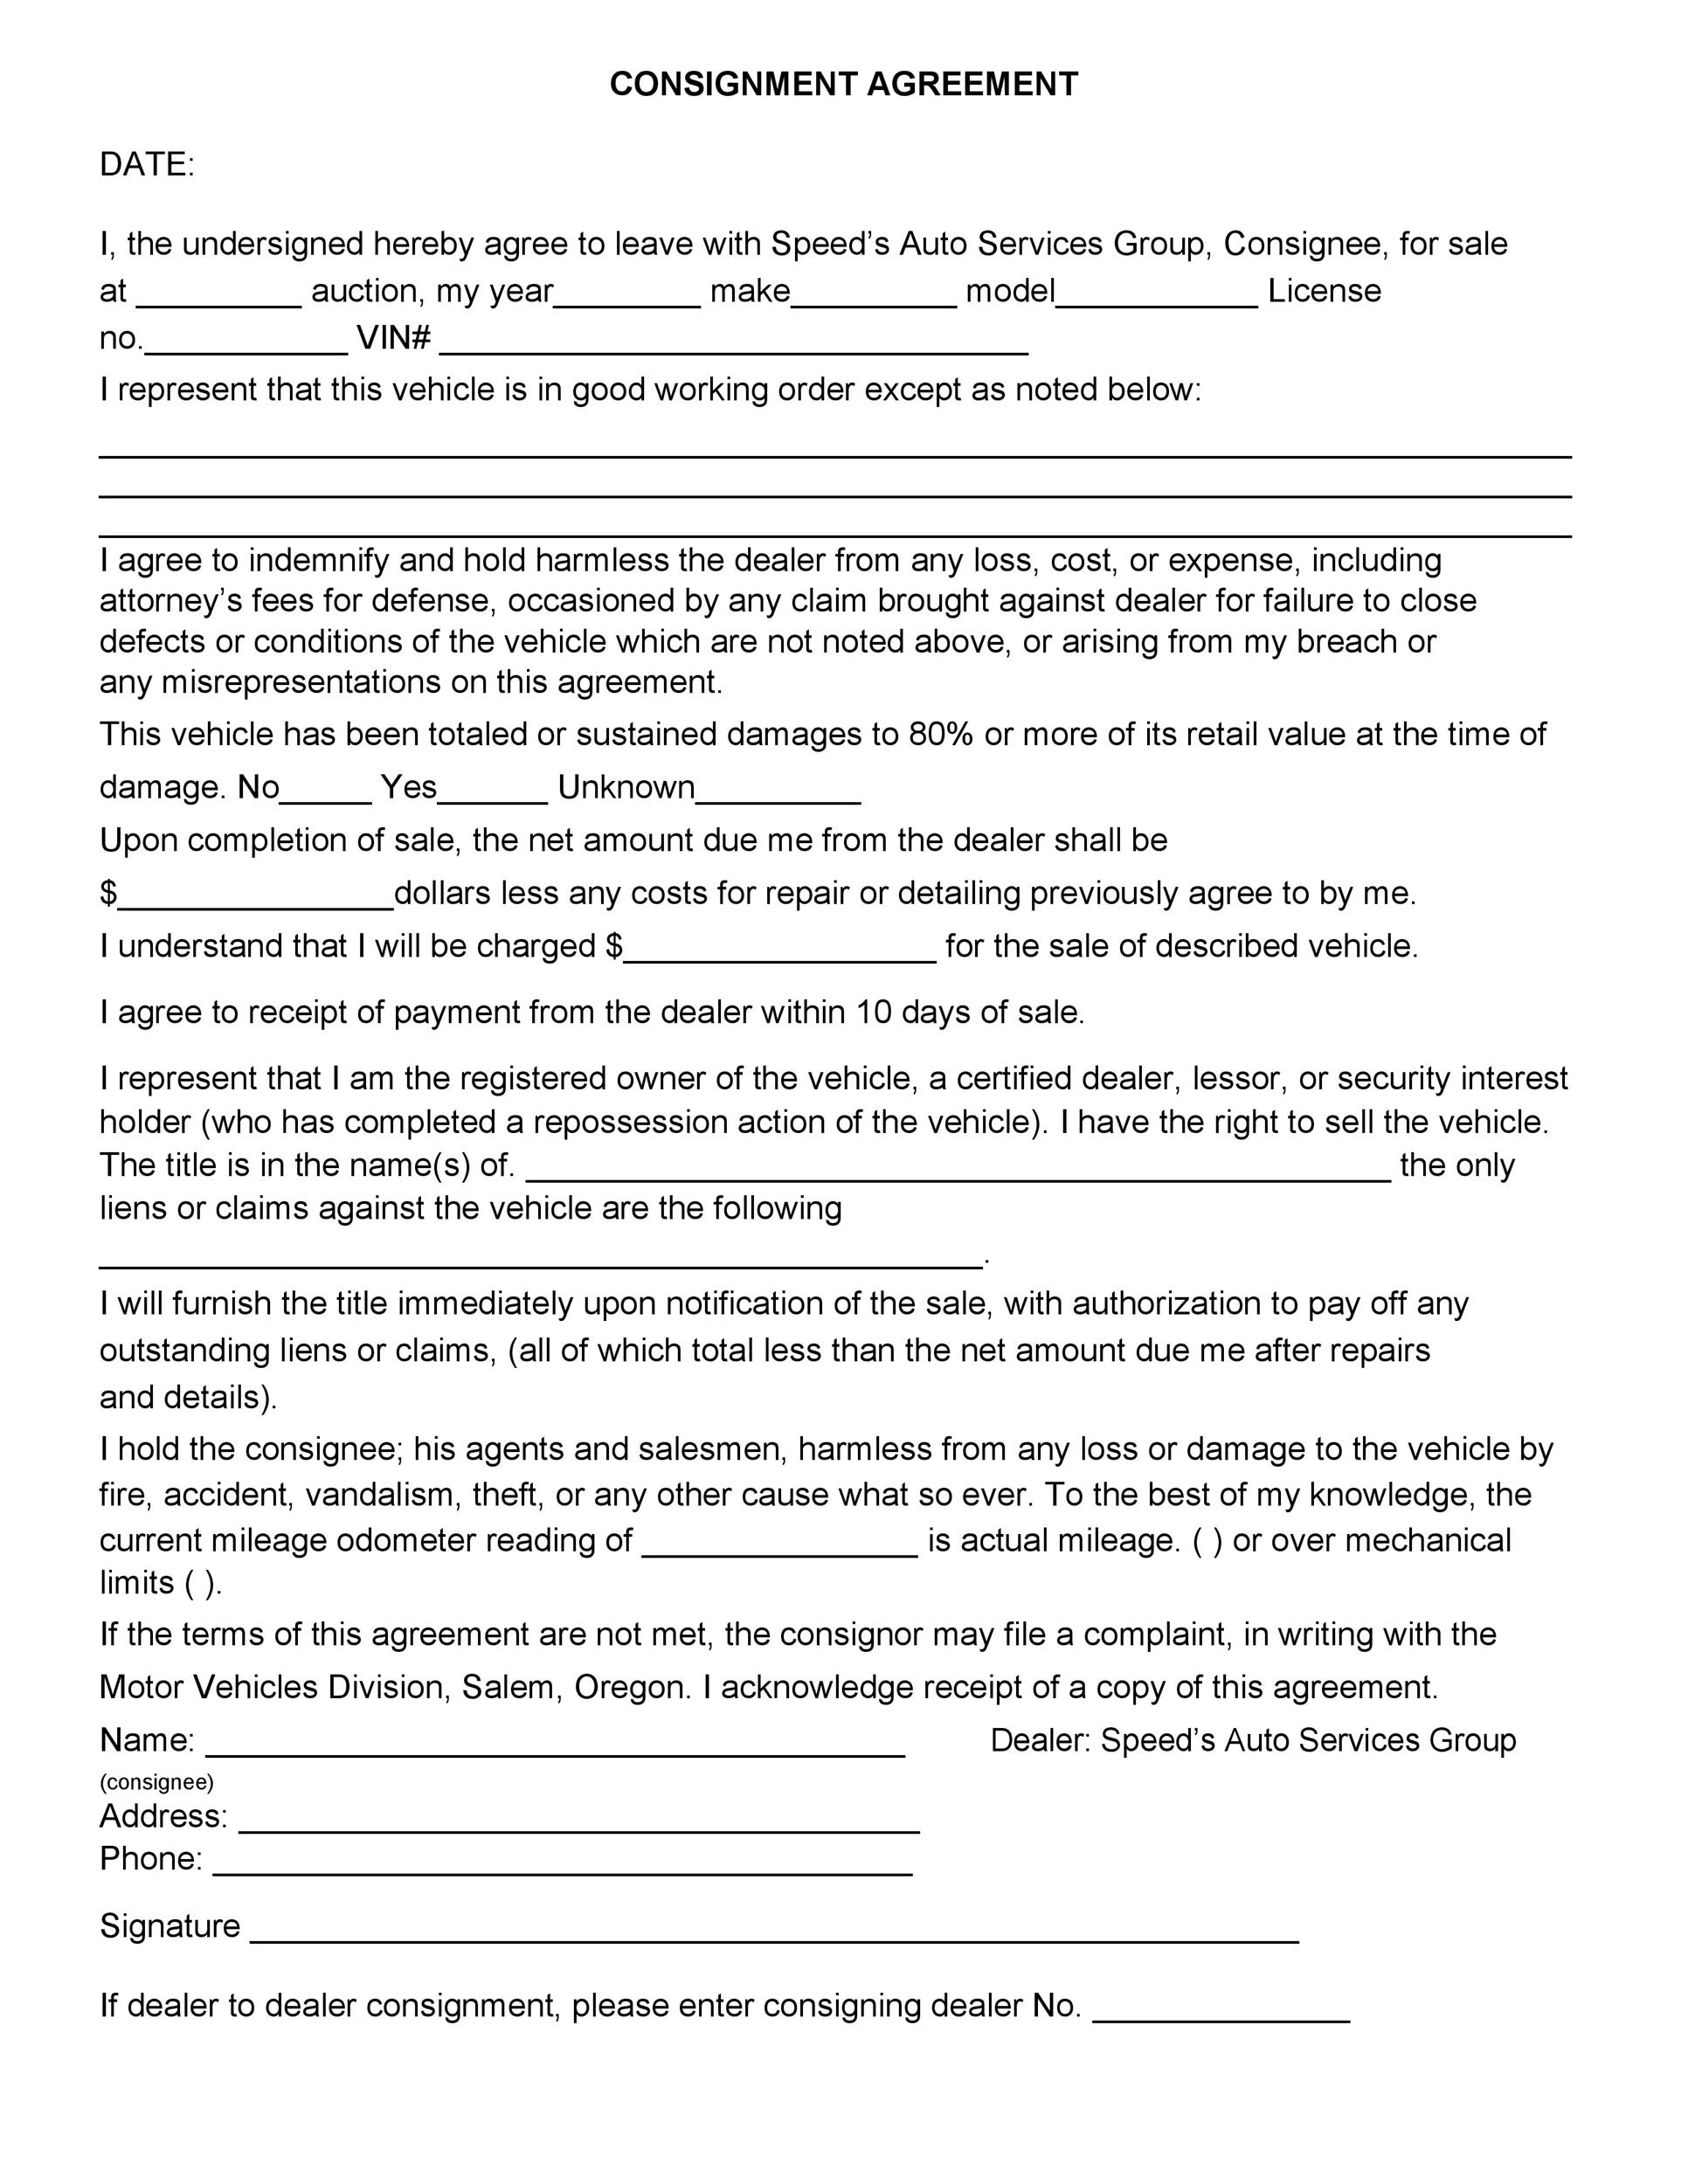 Free Consignment Agreement Template 36